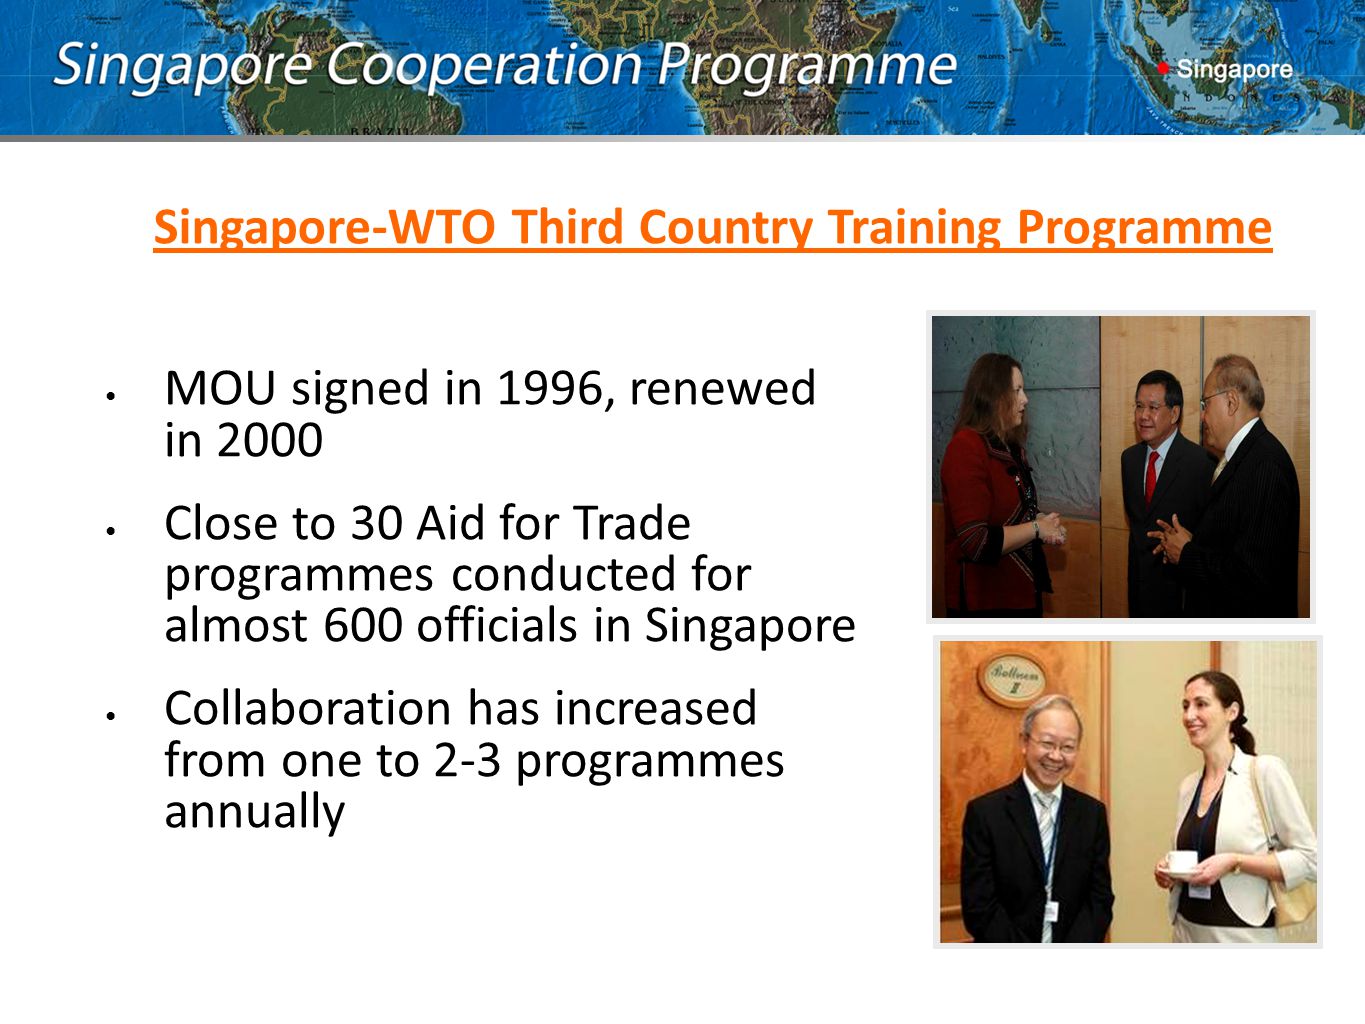 Singapore-WTO Third Country Training Programme MOU signed in 1996, renewed in 2000 Close to 30 Aid for Trade programmes conducted for almost 600 officials in Singapore Collaboration has increased from one to 2-3 programmes annually